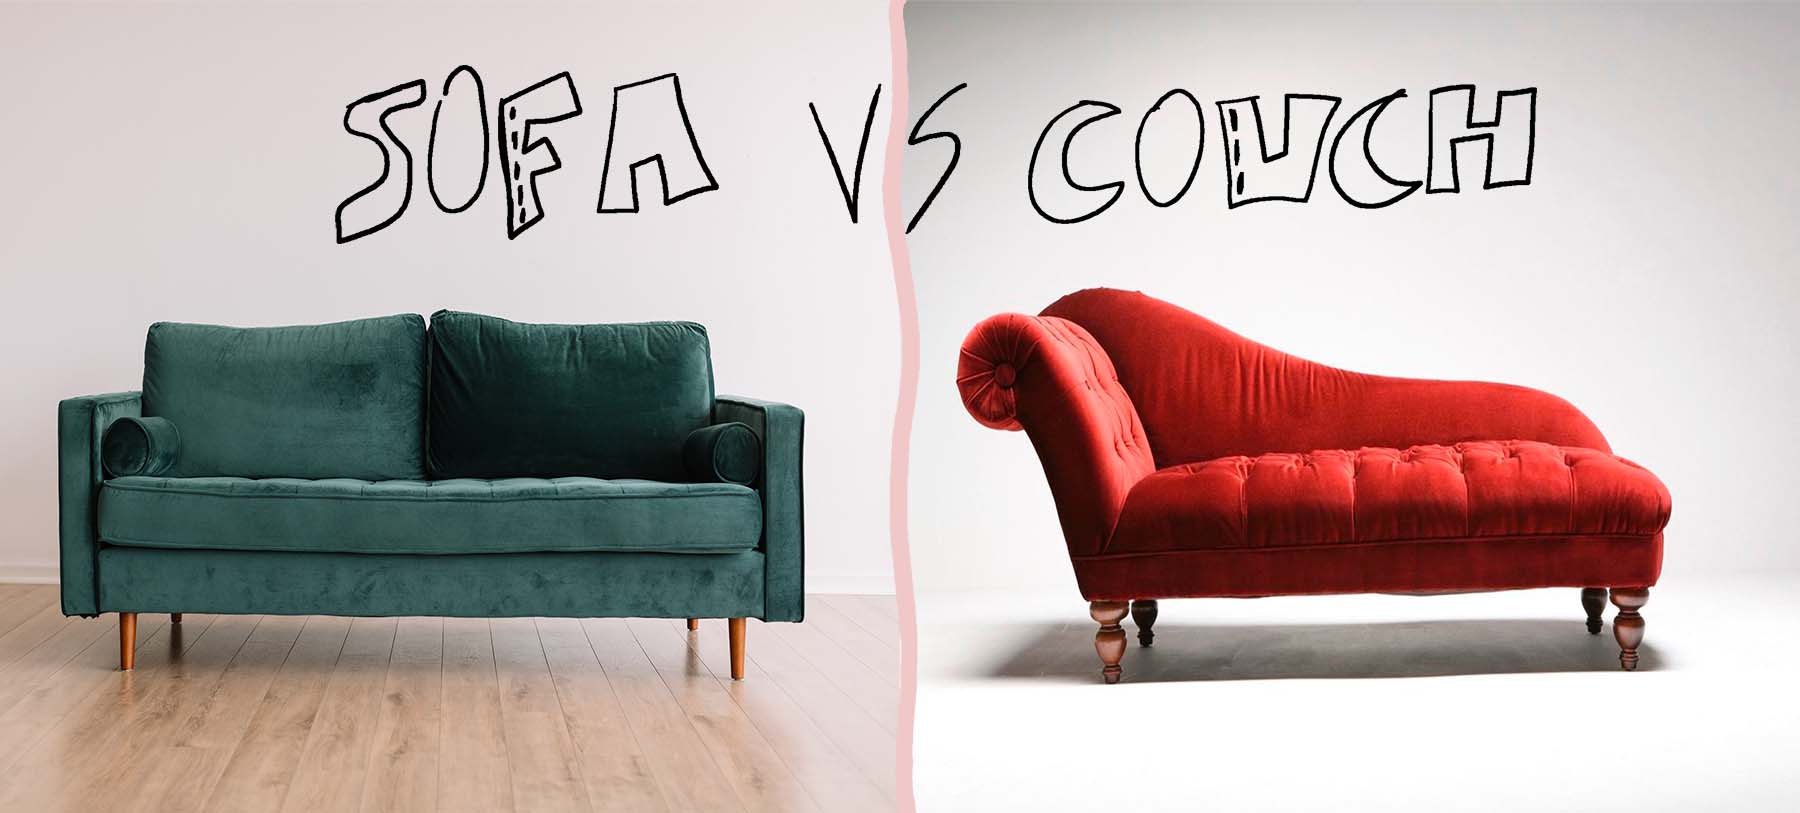 Sofa vs Couch Image